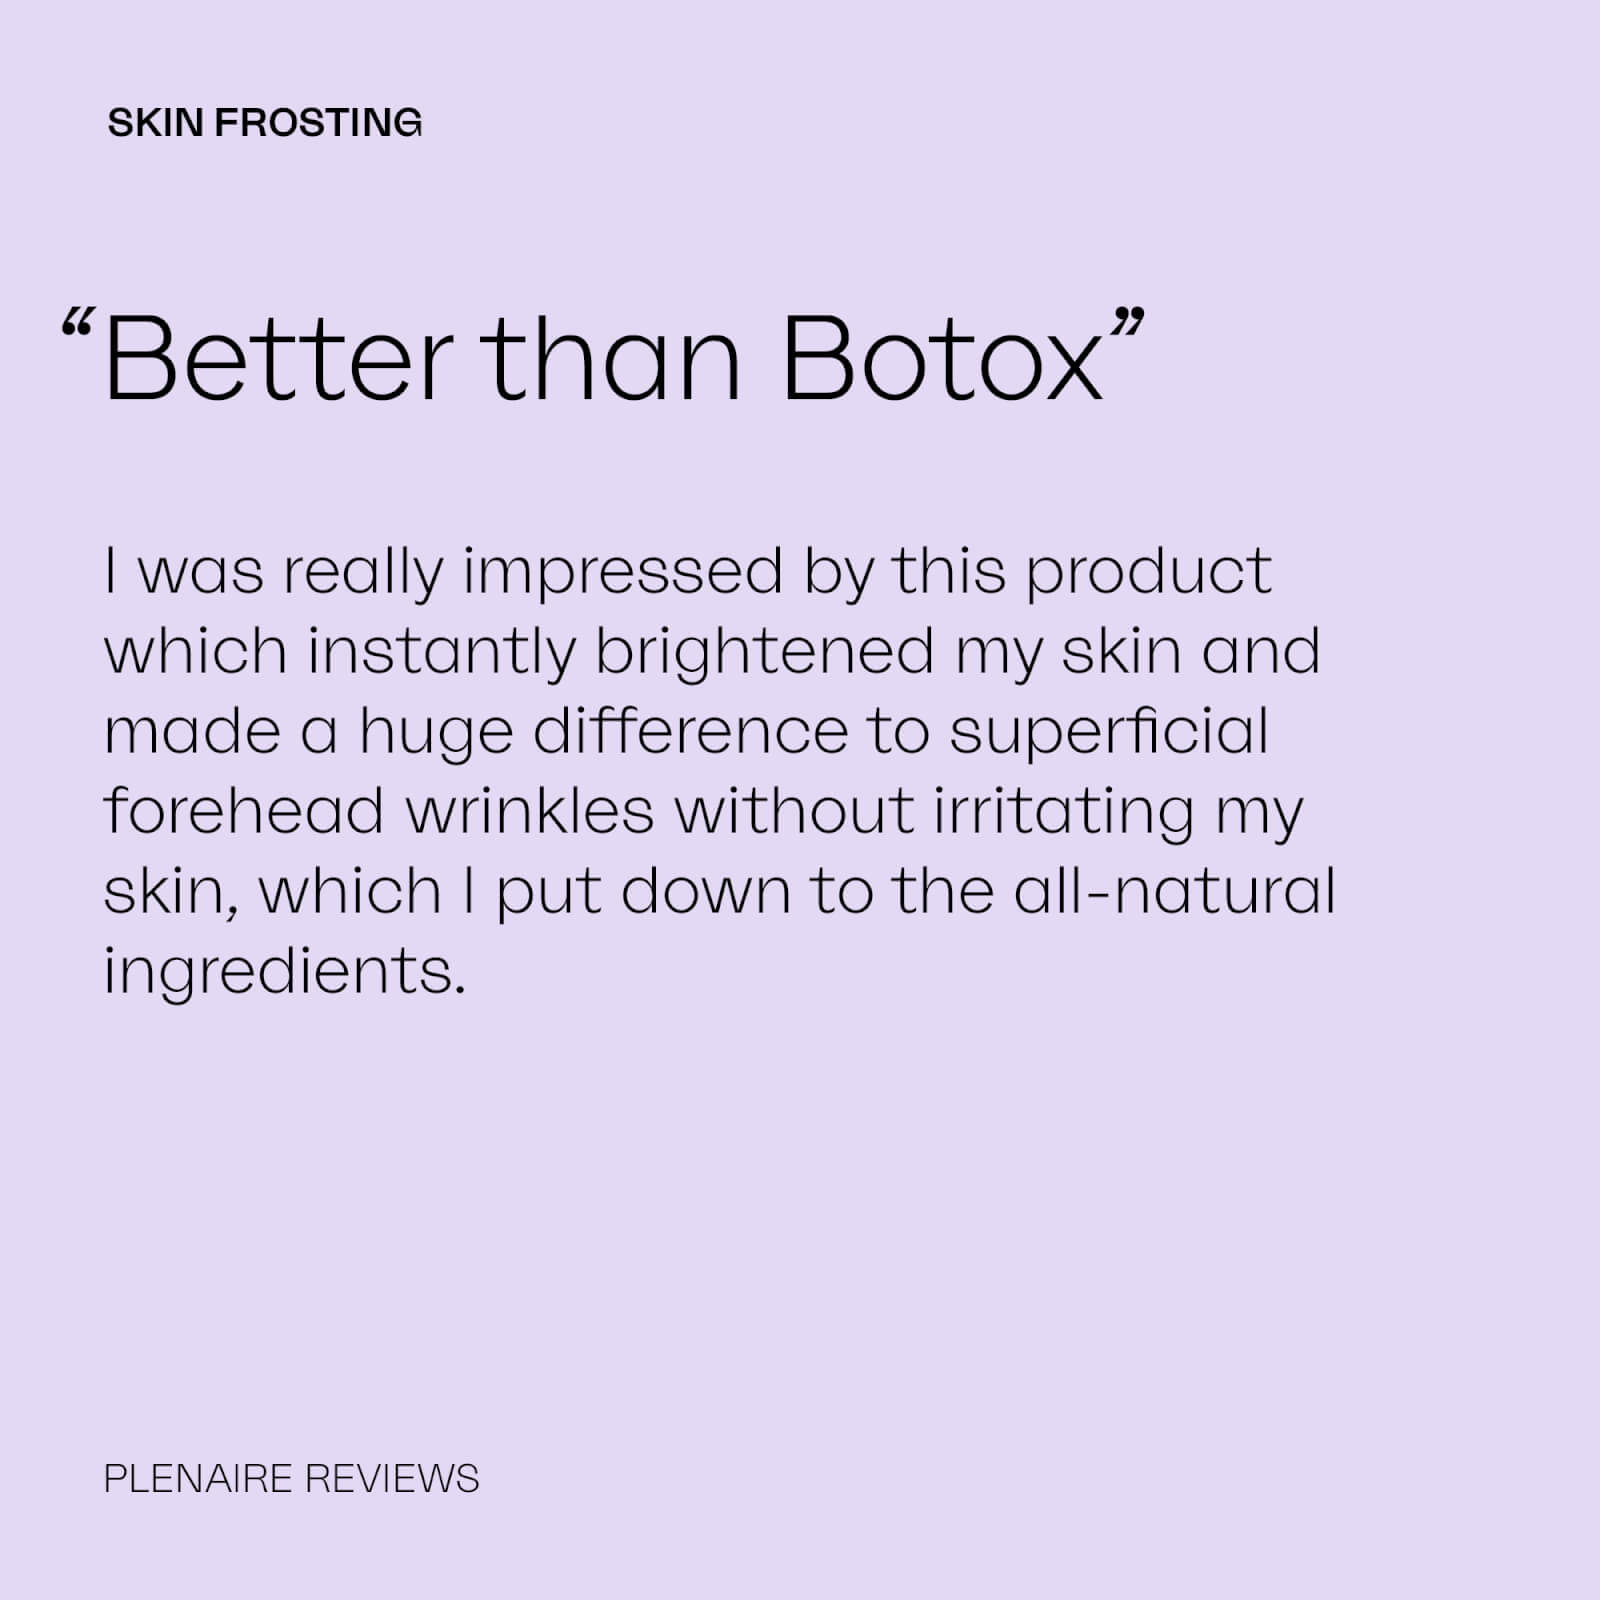 SKIN FROSTING
              “Better than Botox”
              I was really impressed by this product which instantly brightened my skin and made a huge difference to superficial forehead wrinkles without irritating my skin, which I put down to the all-natural ingredients.
              PLENAIRE REVIEWS